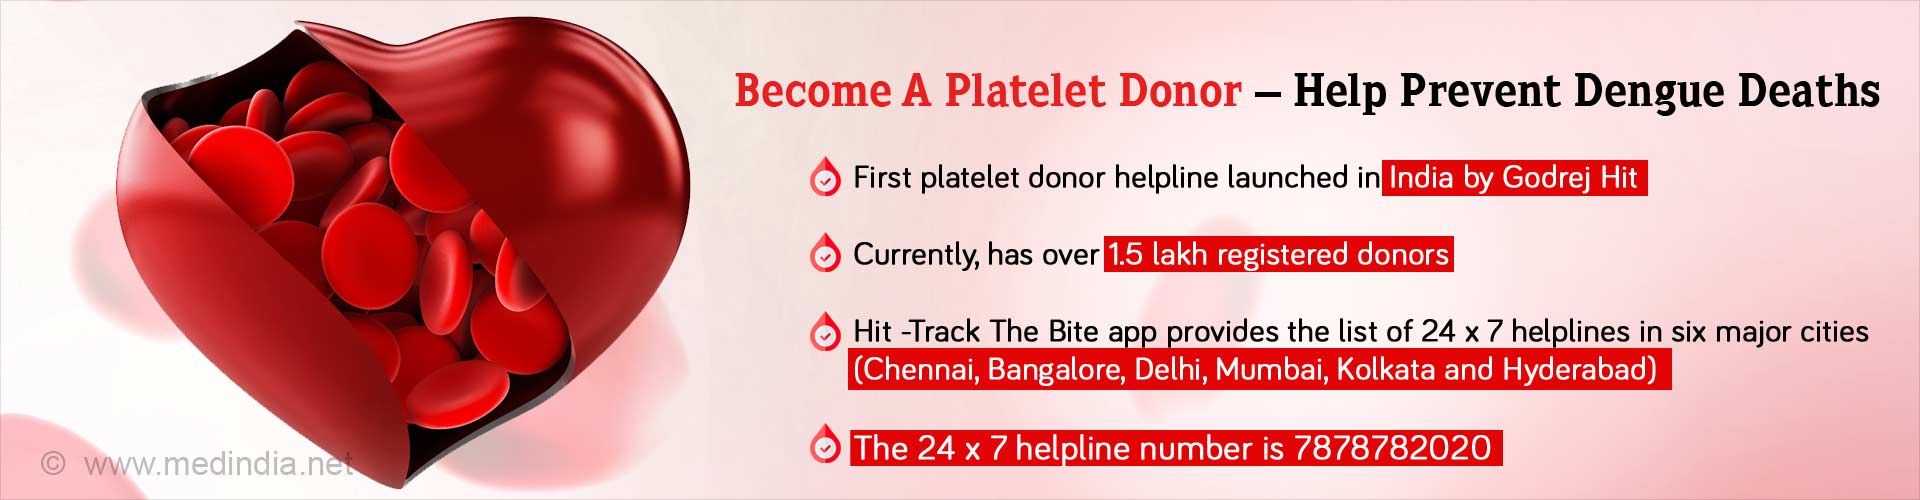 Become a platelet donor 